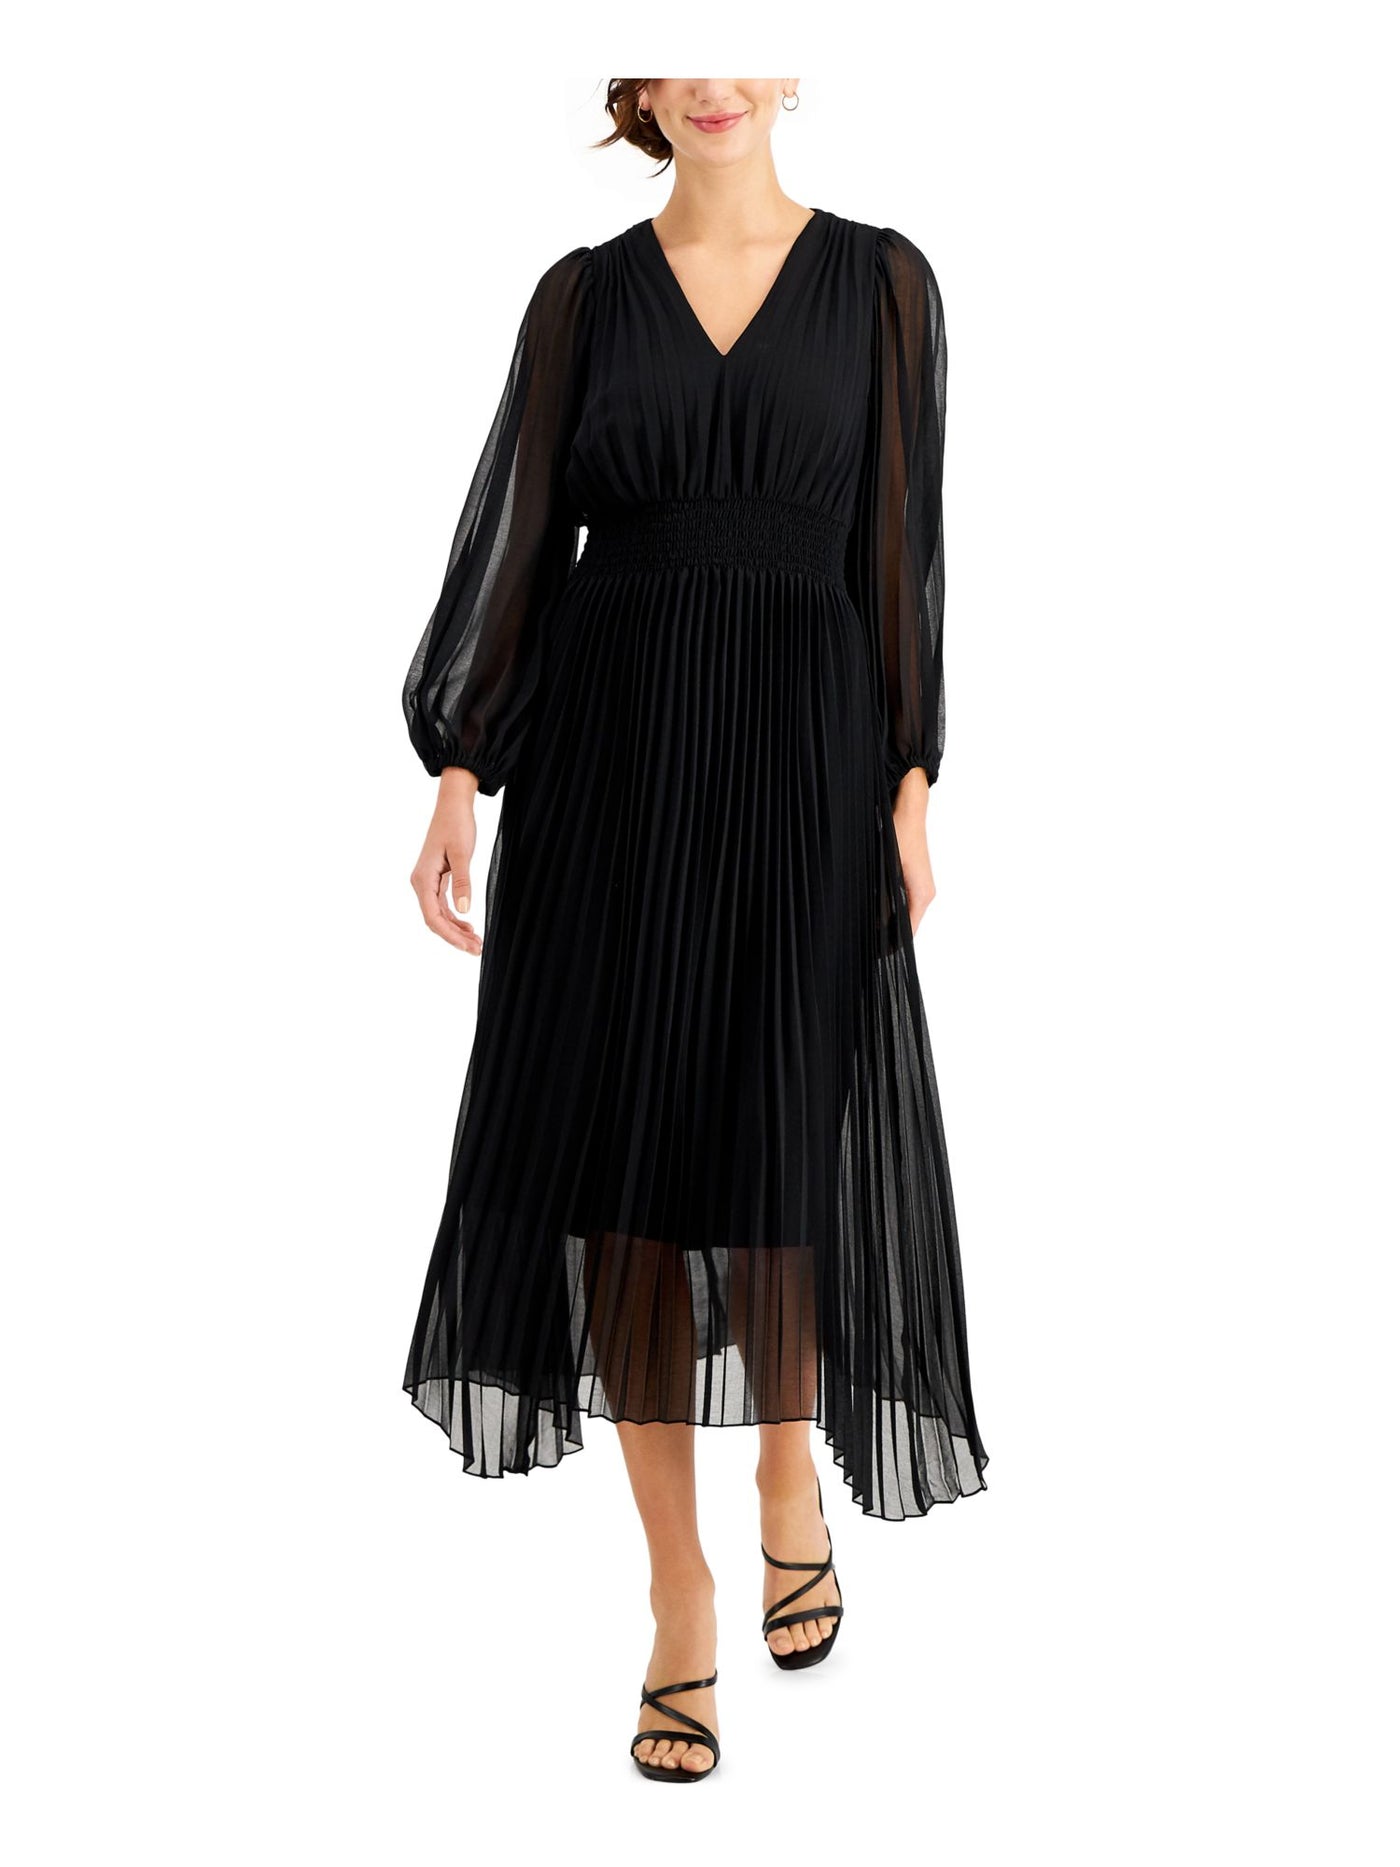 TAYLOR PETITE Womens Black Stretch Pleated Sheer Smocked Lined Long Sleeve V Neck Midi Formal Fit + Flare Dress Petites 8P